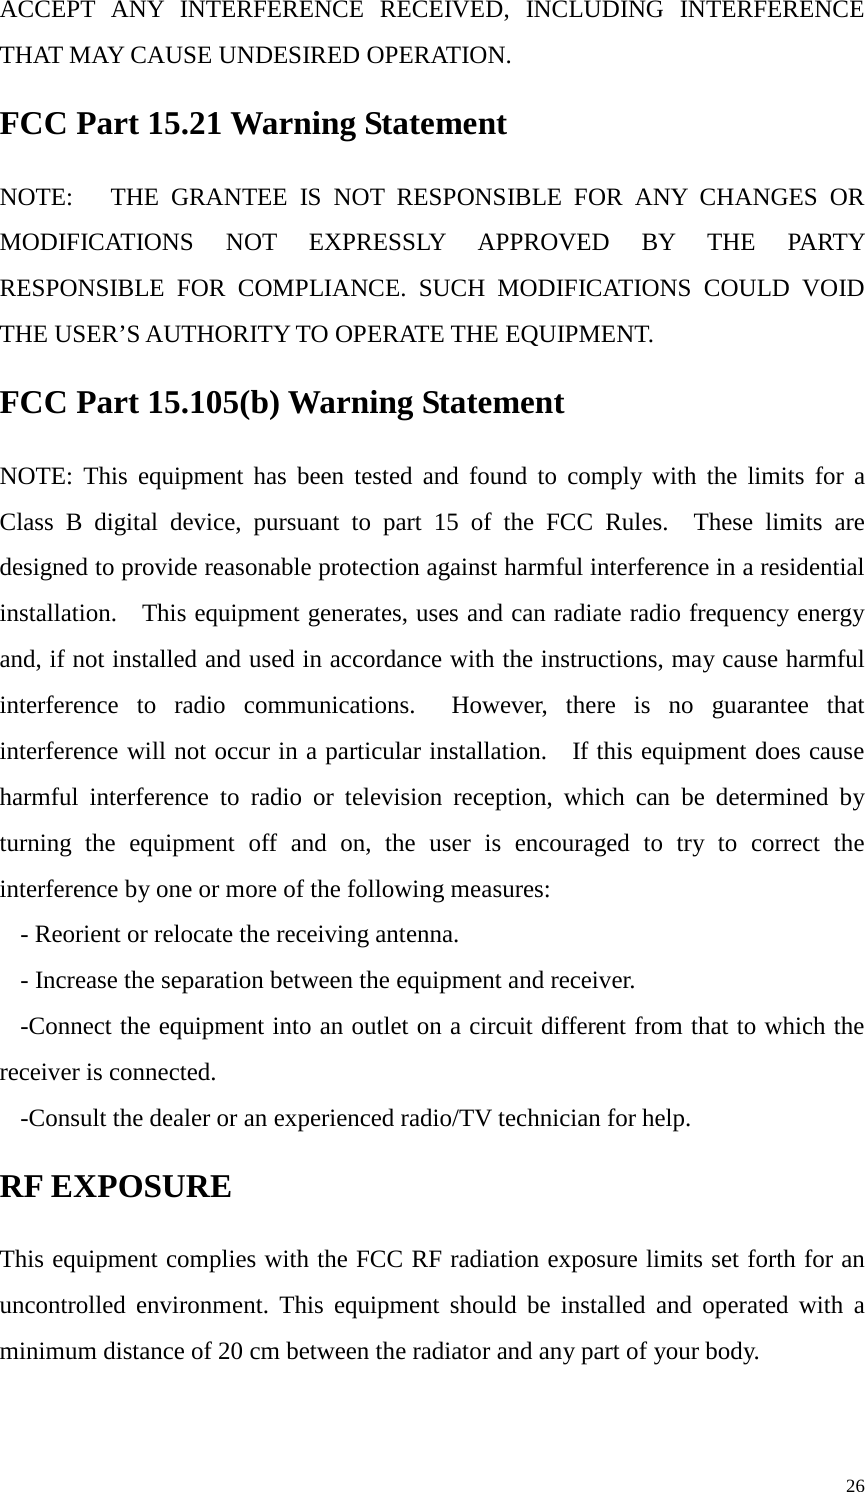   ACCEPT ANY INTERFERENCE RECEIVED, INCLUDING INTERFERENCE THAT MAY CAUSE UNDESIRED OPERATION. FCC Part 15.21 Warning Statement NOTE:   THE GRANTEE IS NOT RESPONSIBLE FOR ANY CHANGES OR MODIFICATIONS NOT EXPRESSLY APPROVED BY THE PARTY RESPONSIBLE FOR COMPLIANCE. SUCH MODIFICATIONS COULD VOID THE USER’S AUTHORITY TO OPERATE THE EQUIPMENT. FCC Part 15.105(b) Warning Statement NOTE: This equipment has been tested and found to comply with the limits for a Class B digital device, pursuant to part 15 of the FCC Rules.  These limits are designed to provide reasonable protection against harmful interference in a residential installation.    This equipment generates, uses and can radiate radio frequency energy and, if not installed and used in accordance with the instructions, may cause harmful interference to radio communications.  However, there is no guarantee that interference will not occur in a particular installation.    If this equipment does cause harmful interference to radio or television reception, which can be determined by turning the equipment off and on, the user is encouraged to try to correct the interference by one or more of the following measures: - Reorient or relocate the receiving antenna. - Increase the separation between the equipment and receiver. -Connect the equipment into an outlet on a circuit different from that to which the receiver is connected. -Consult the dealer or an experienced radio/TV technician for help. RF EXPOSURE This equipment complies with the FCC RF radiation exposure limits set forth for an uncontrolled environment. This equipment should be installed and operated with a minimum distance of 20 cm between the radiator and any part of your body.     26 